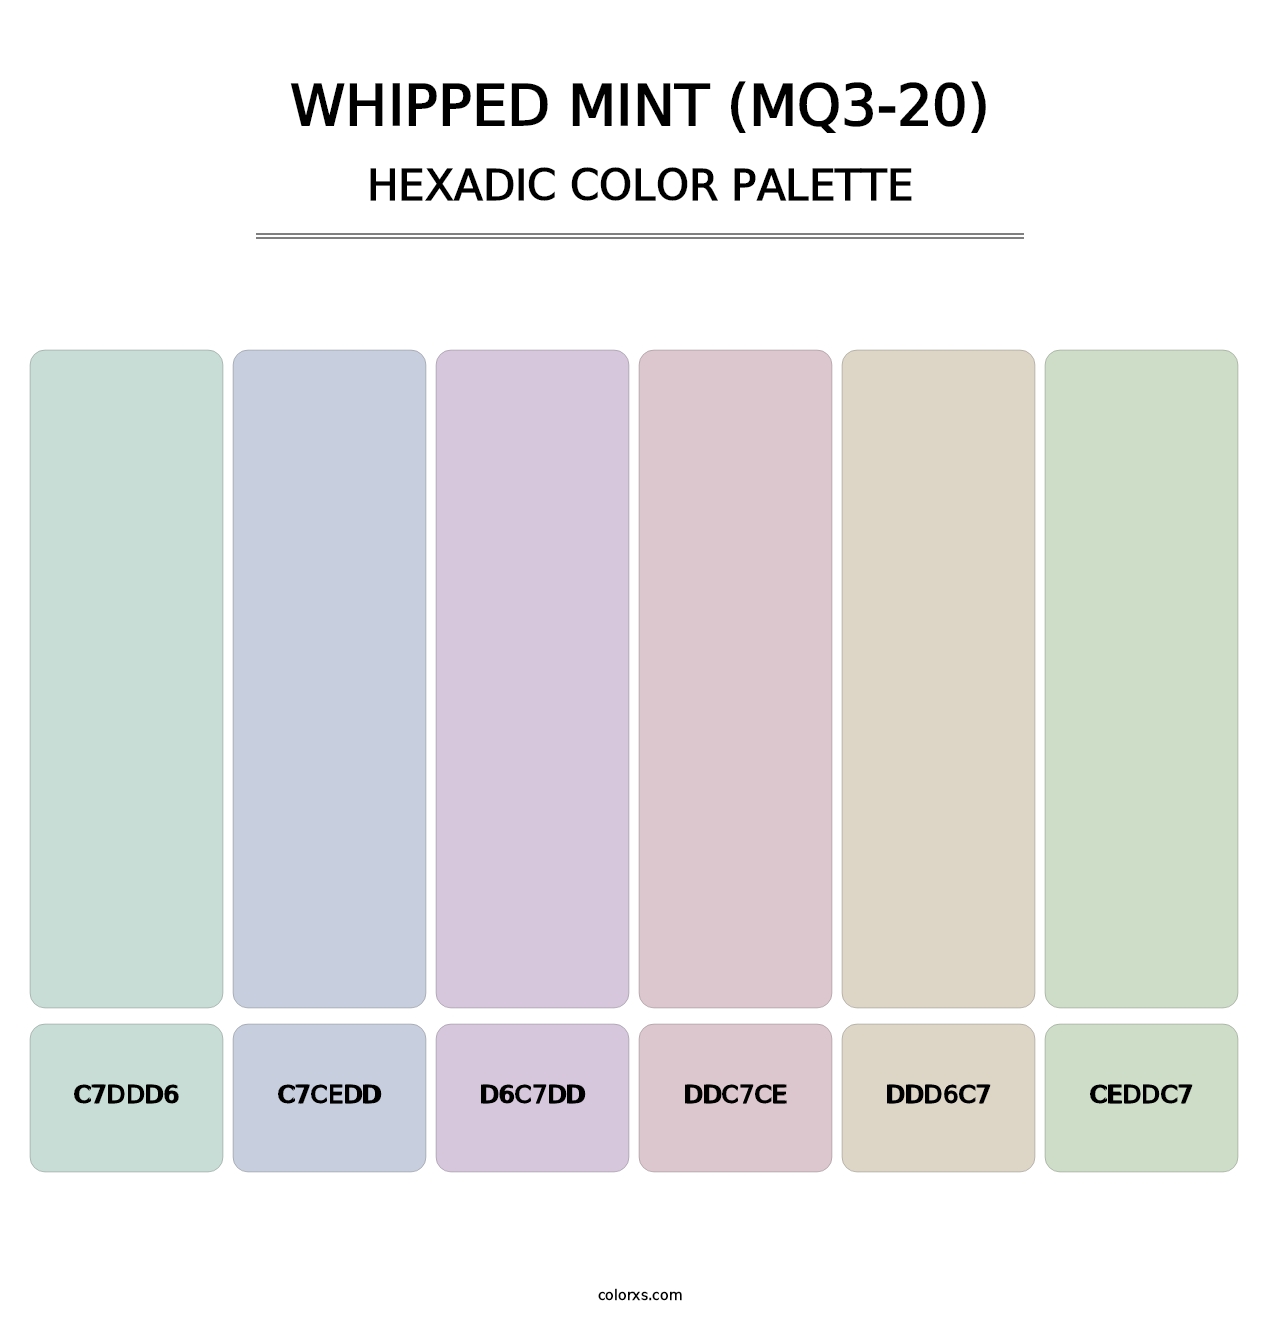 Whipped Mint (MQ3-20) - Hexadic Color Palette